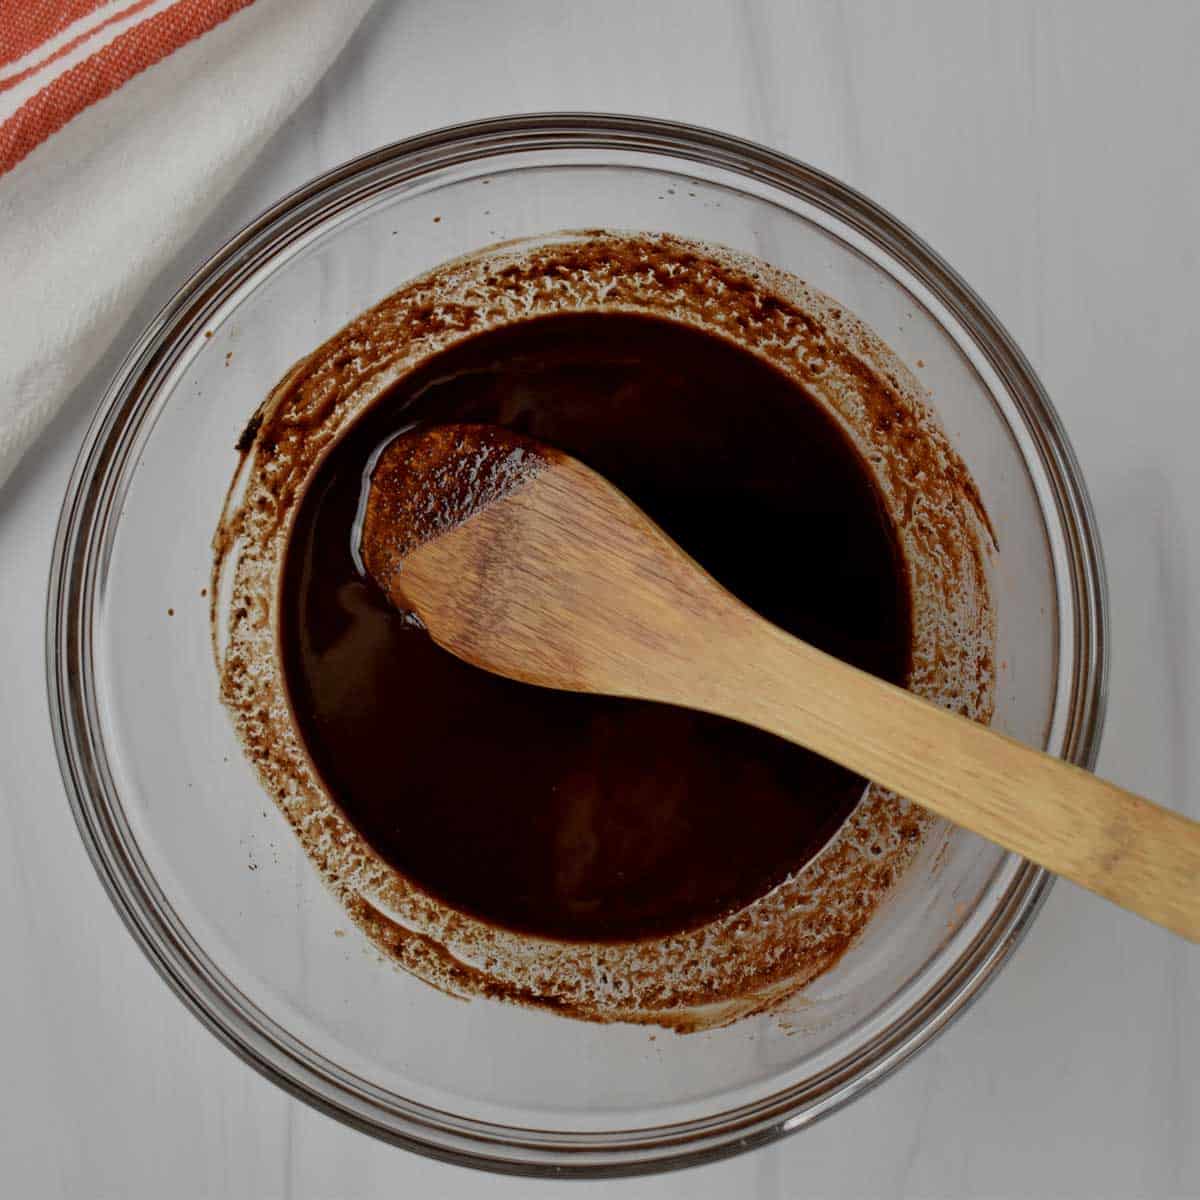 Melted butter and unsweetened cocoa powder stirred together in glass mixing bowl.